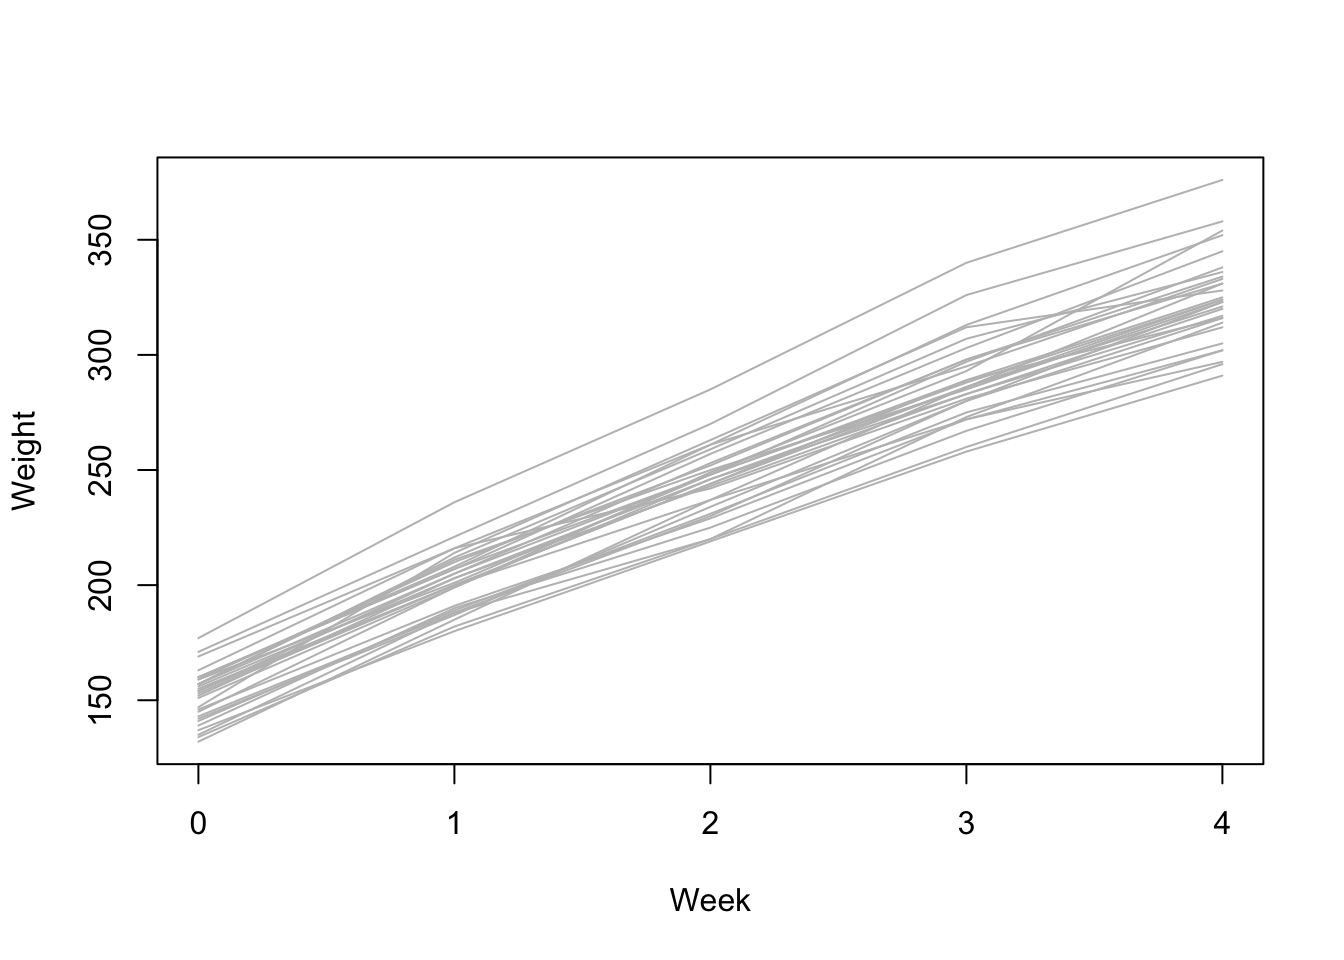 Individual rat weight by week, for the rat growth data.